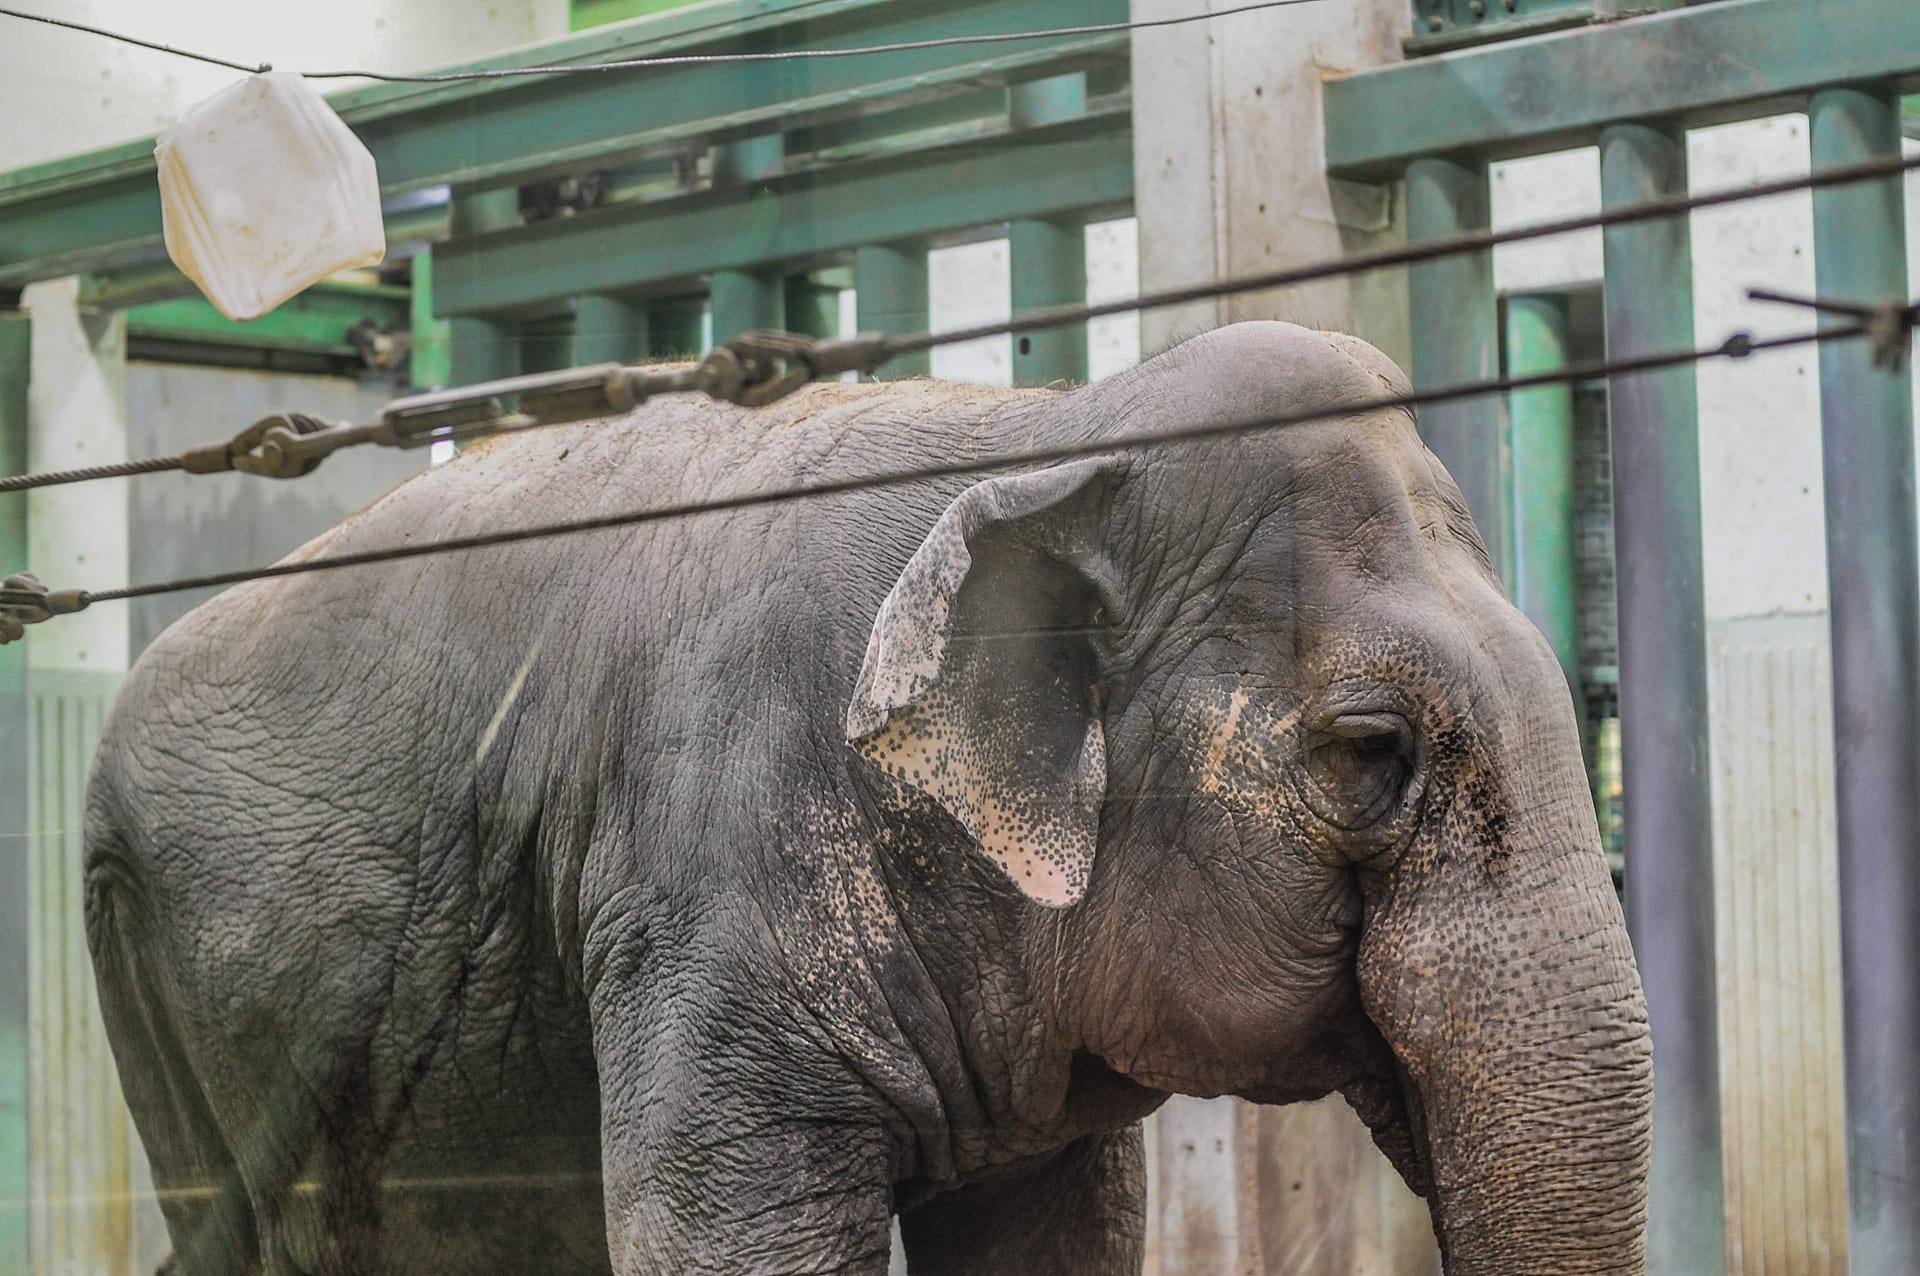 Image shows Lucy the elephant at the Edmonton Valley Zoo